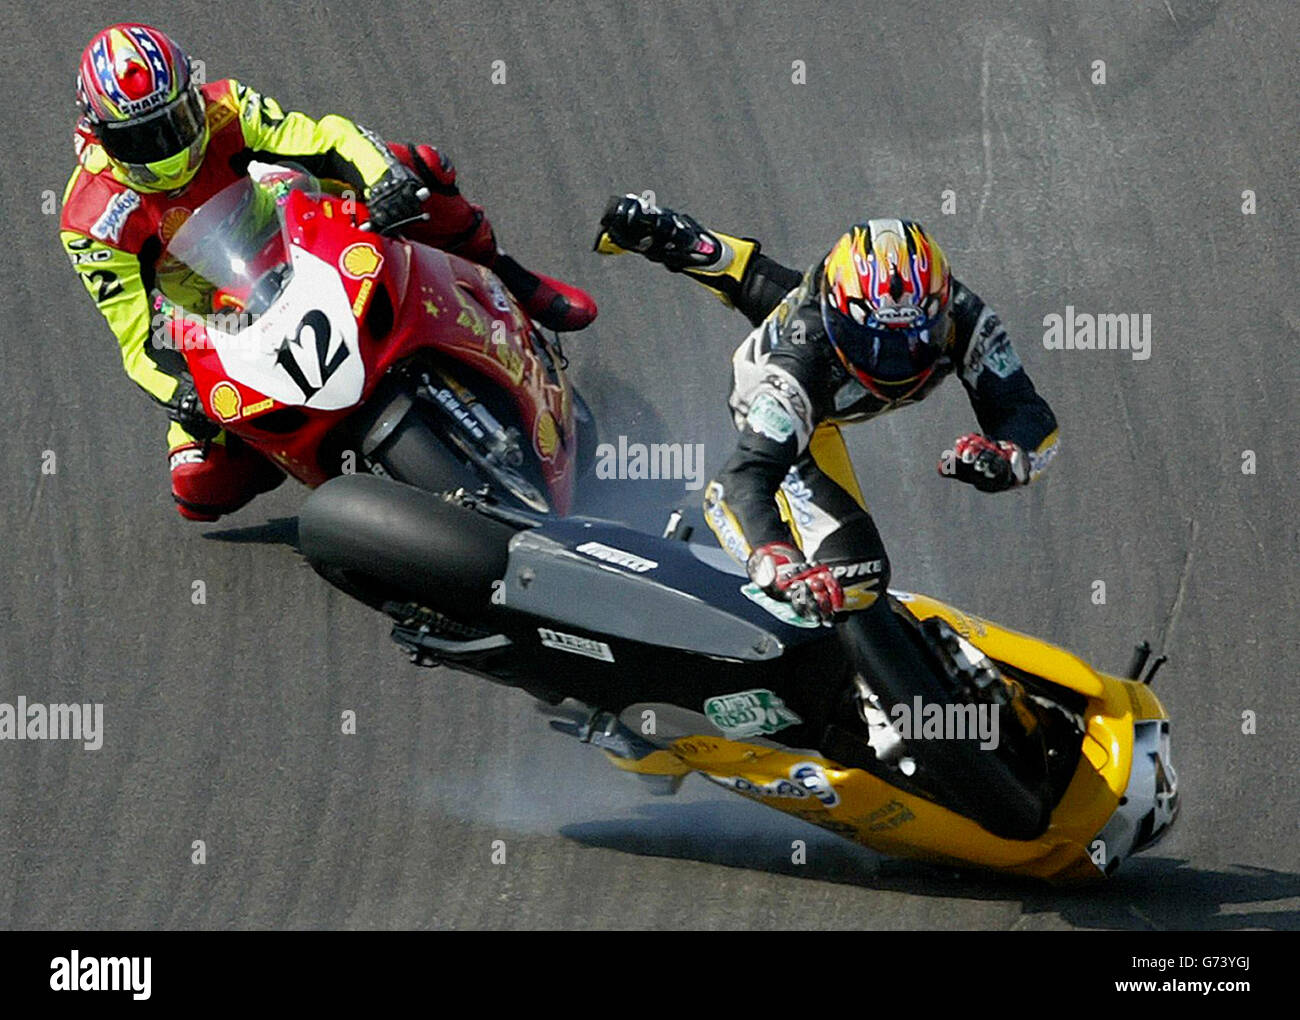 Italy's Giancarlo DeMatteis crashes badly and is narrowly missed by Warwick Nowland (12) during the second of the day's races on round 8 of the SBK World Superbike Championships at Brands Hatch. 01/08/2004 Picture: Gareth Fuller/PA Photos Stock Photo